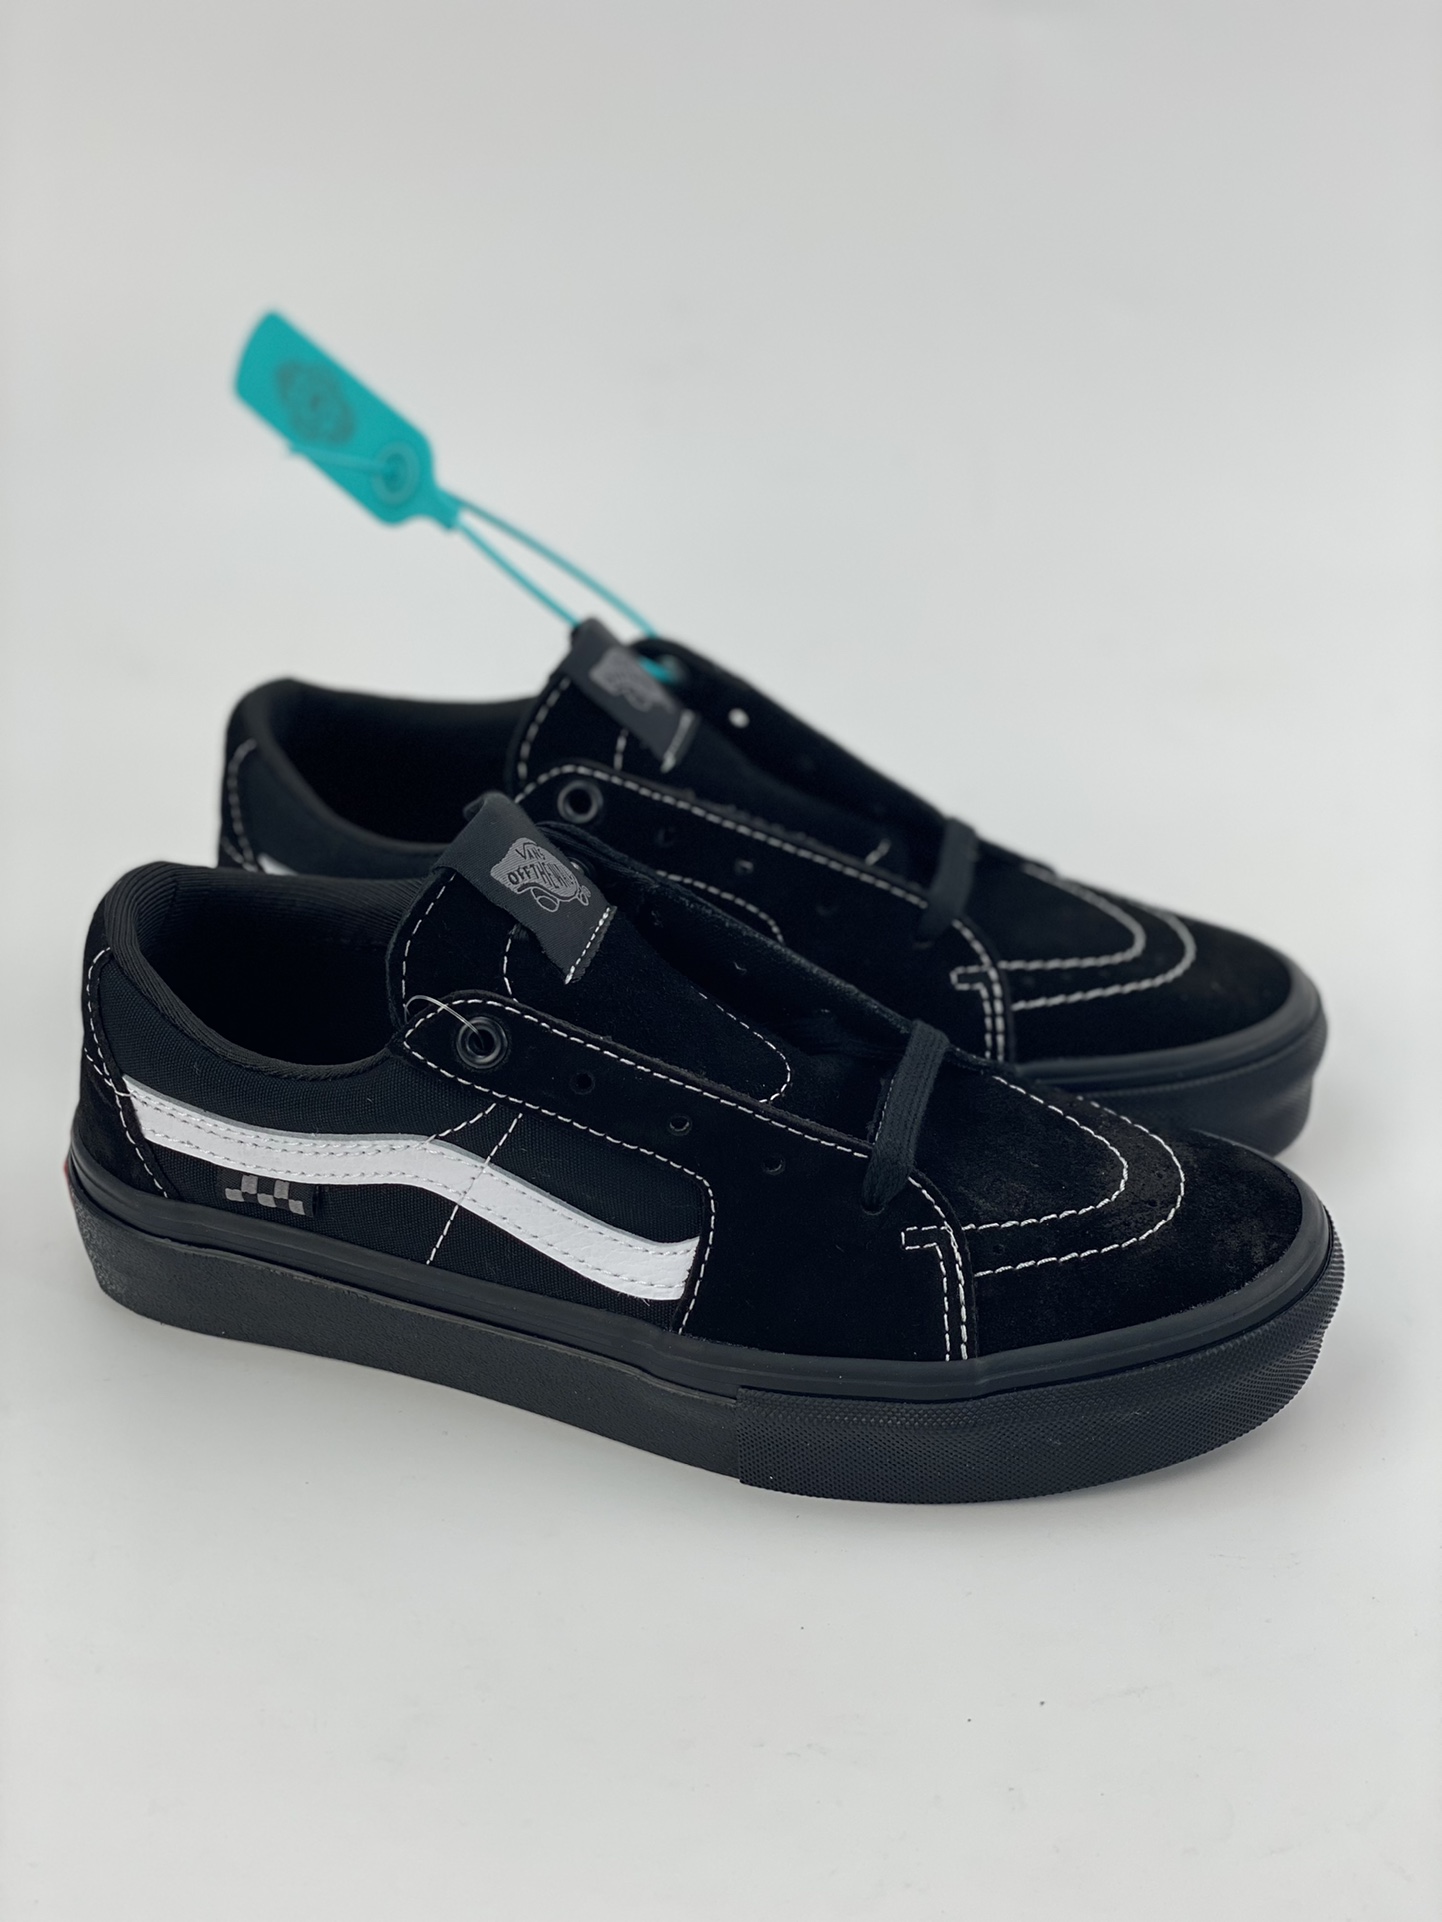 VANS MN SK8-LOW PRO Skate black classic suede side logo checkerboard sports casual shoes skateboard shoes